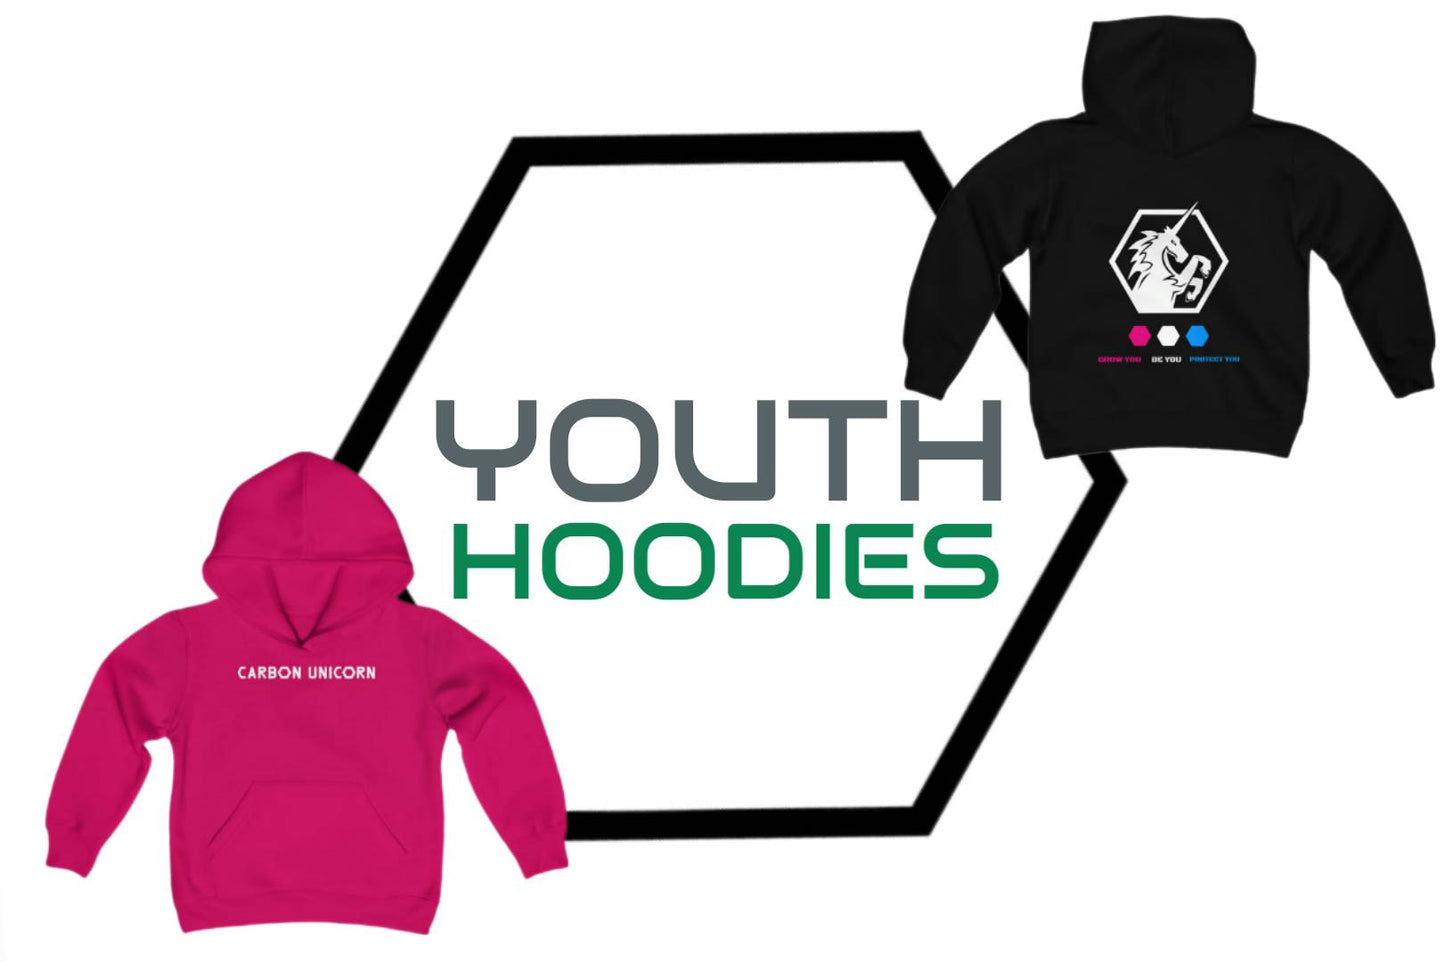 Hoodies for the Youth!